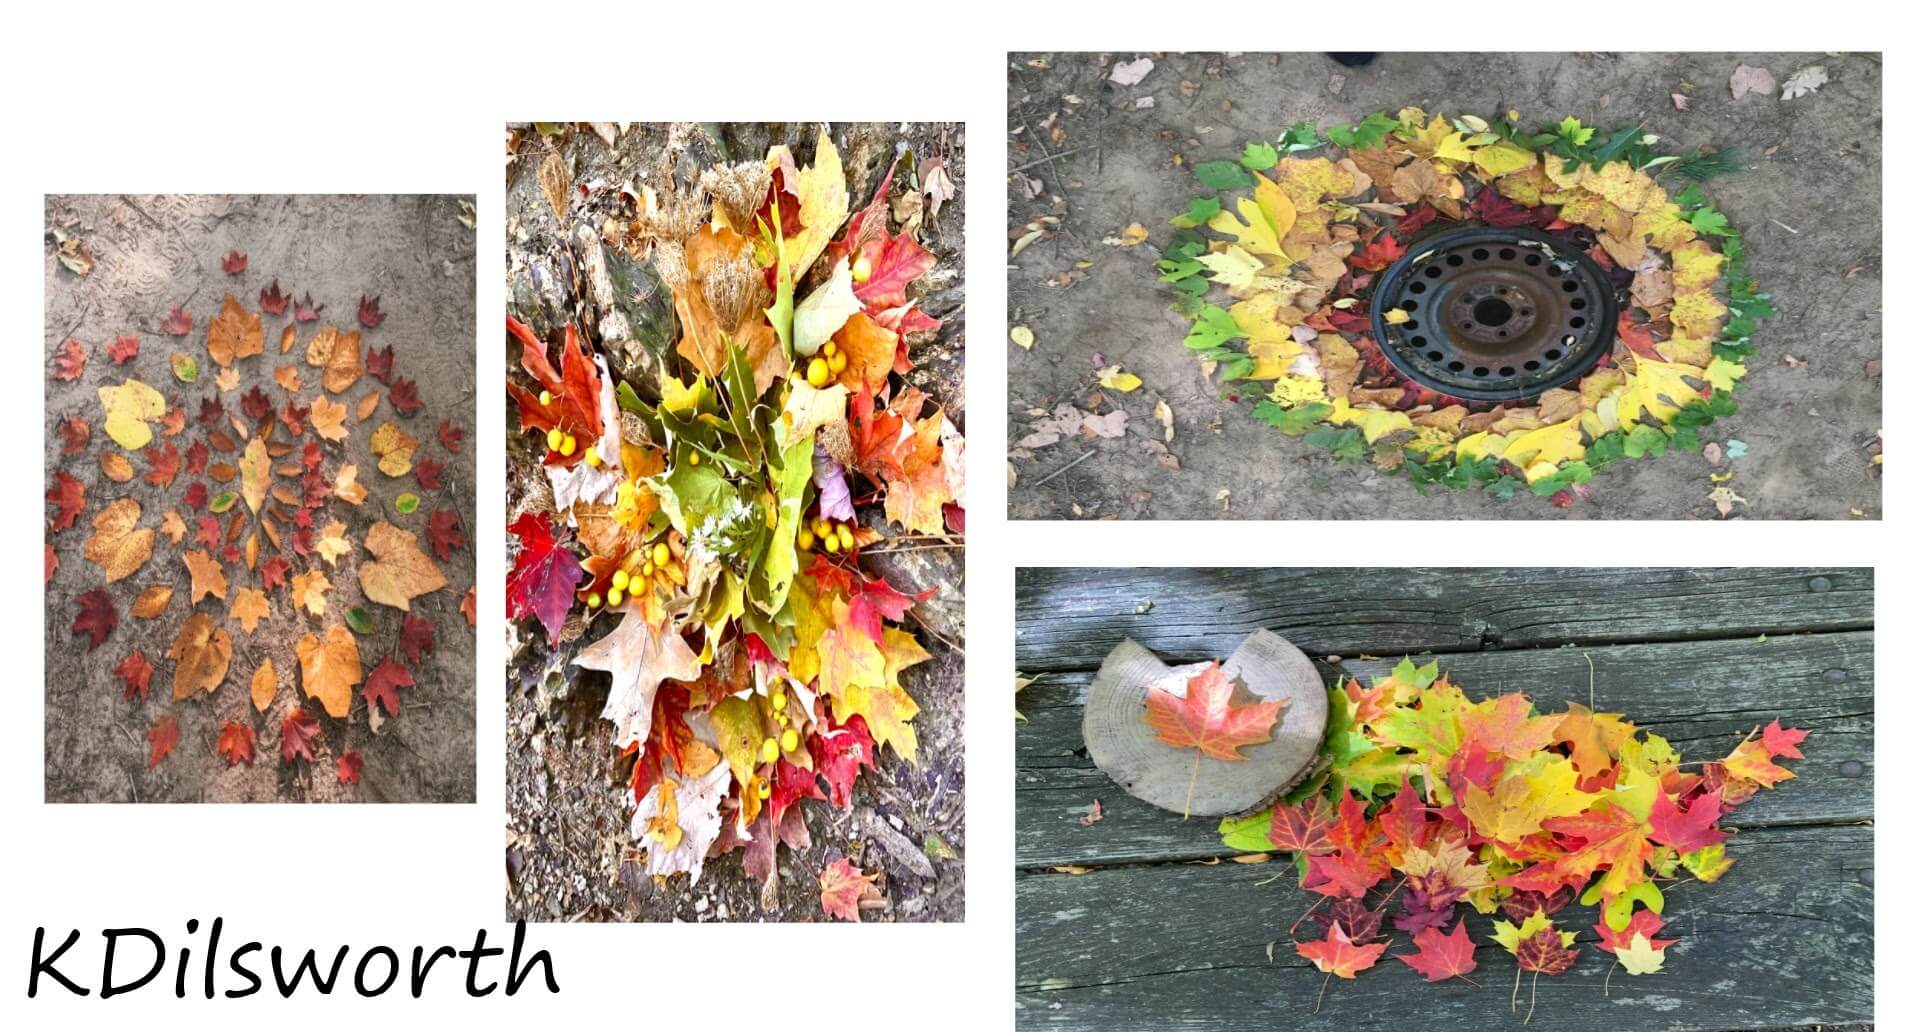 Leaf art created by students